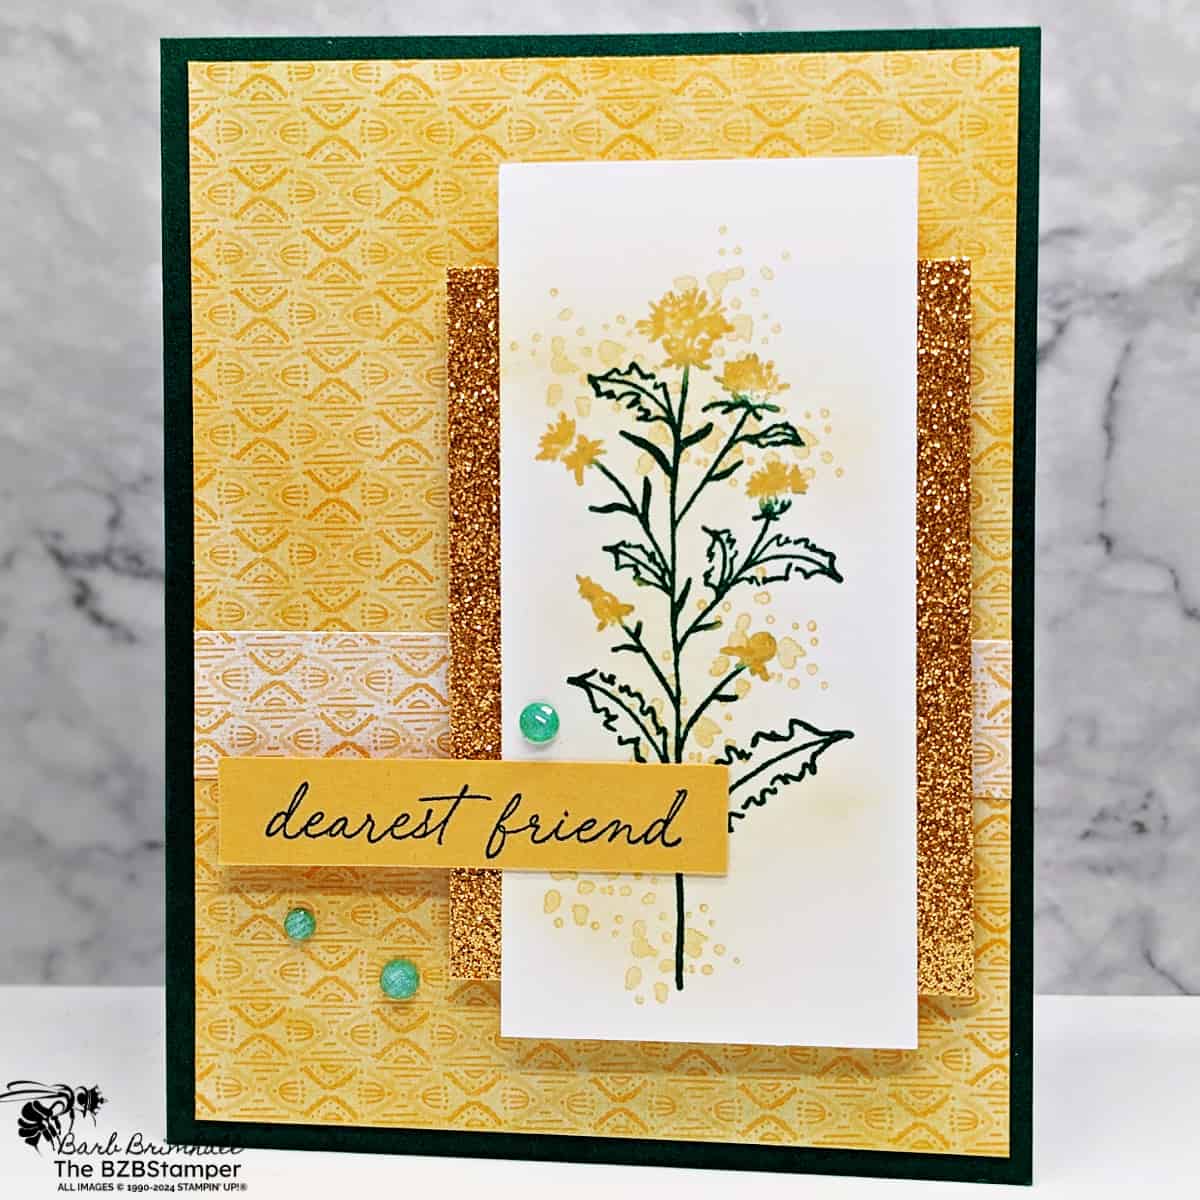 Stamp Your Way To Beautiful Handmade Cards featuring yellow flowers, yellow and gold background papers, and a "dearest friend" sentiment.